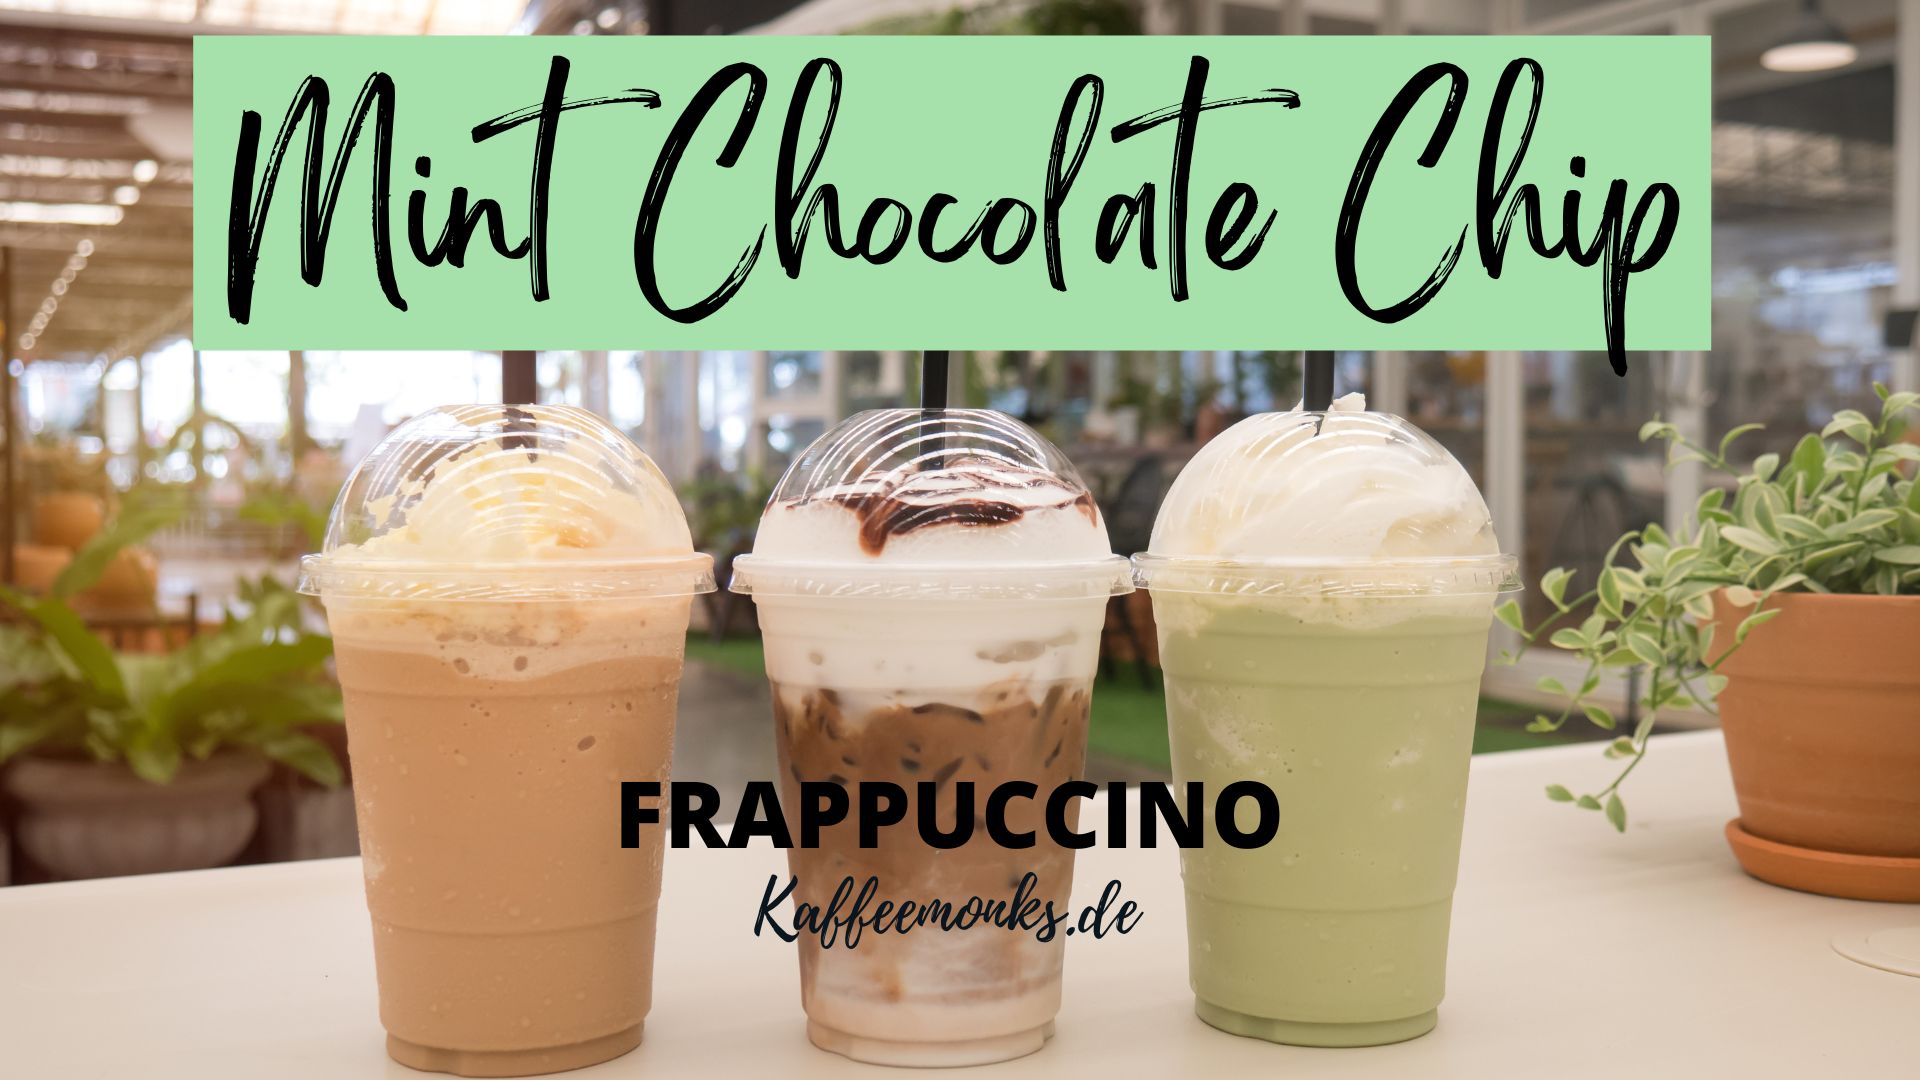 You are currently viewing MINT CHOCOLATE CHIP FRAPPUCCINO